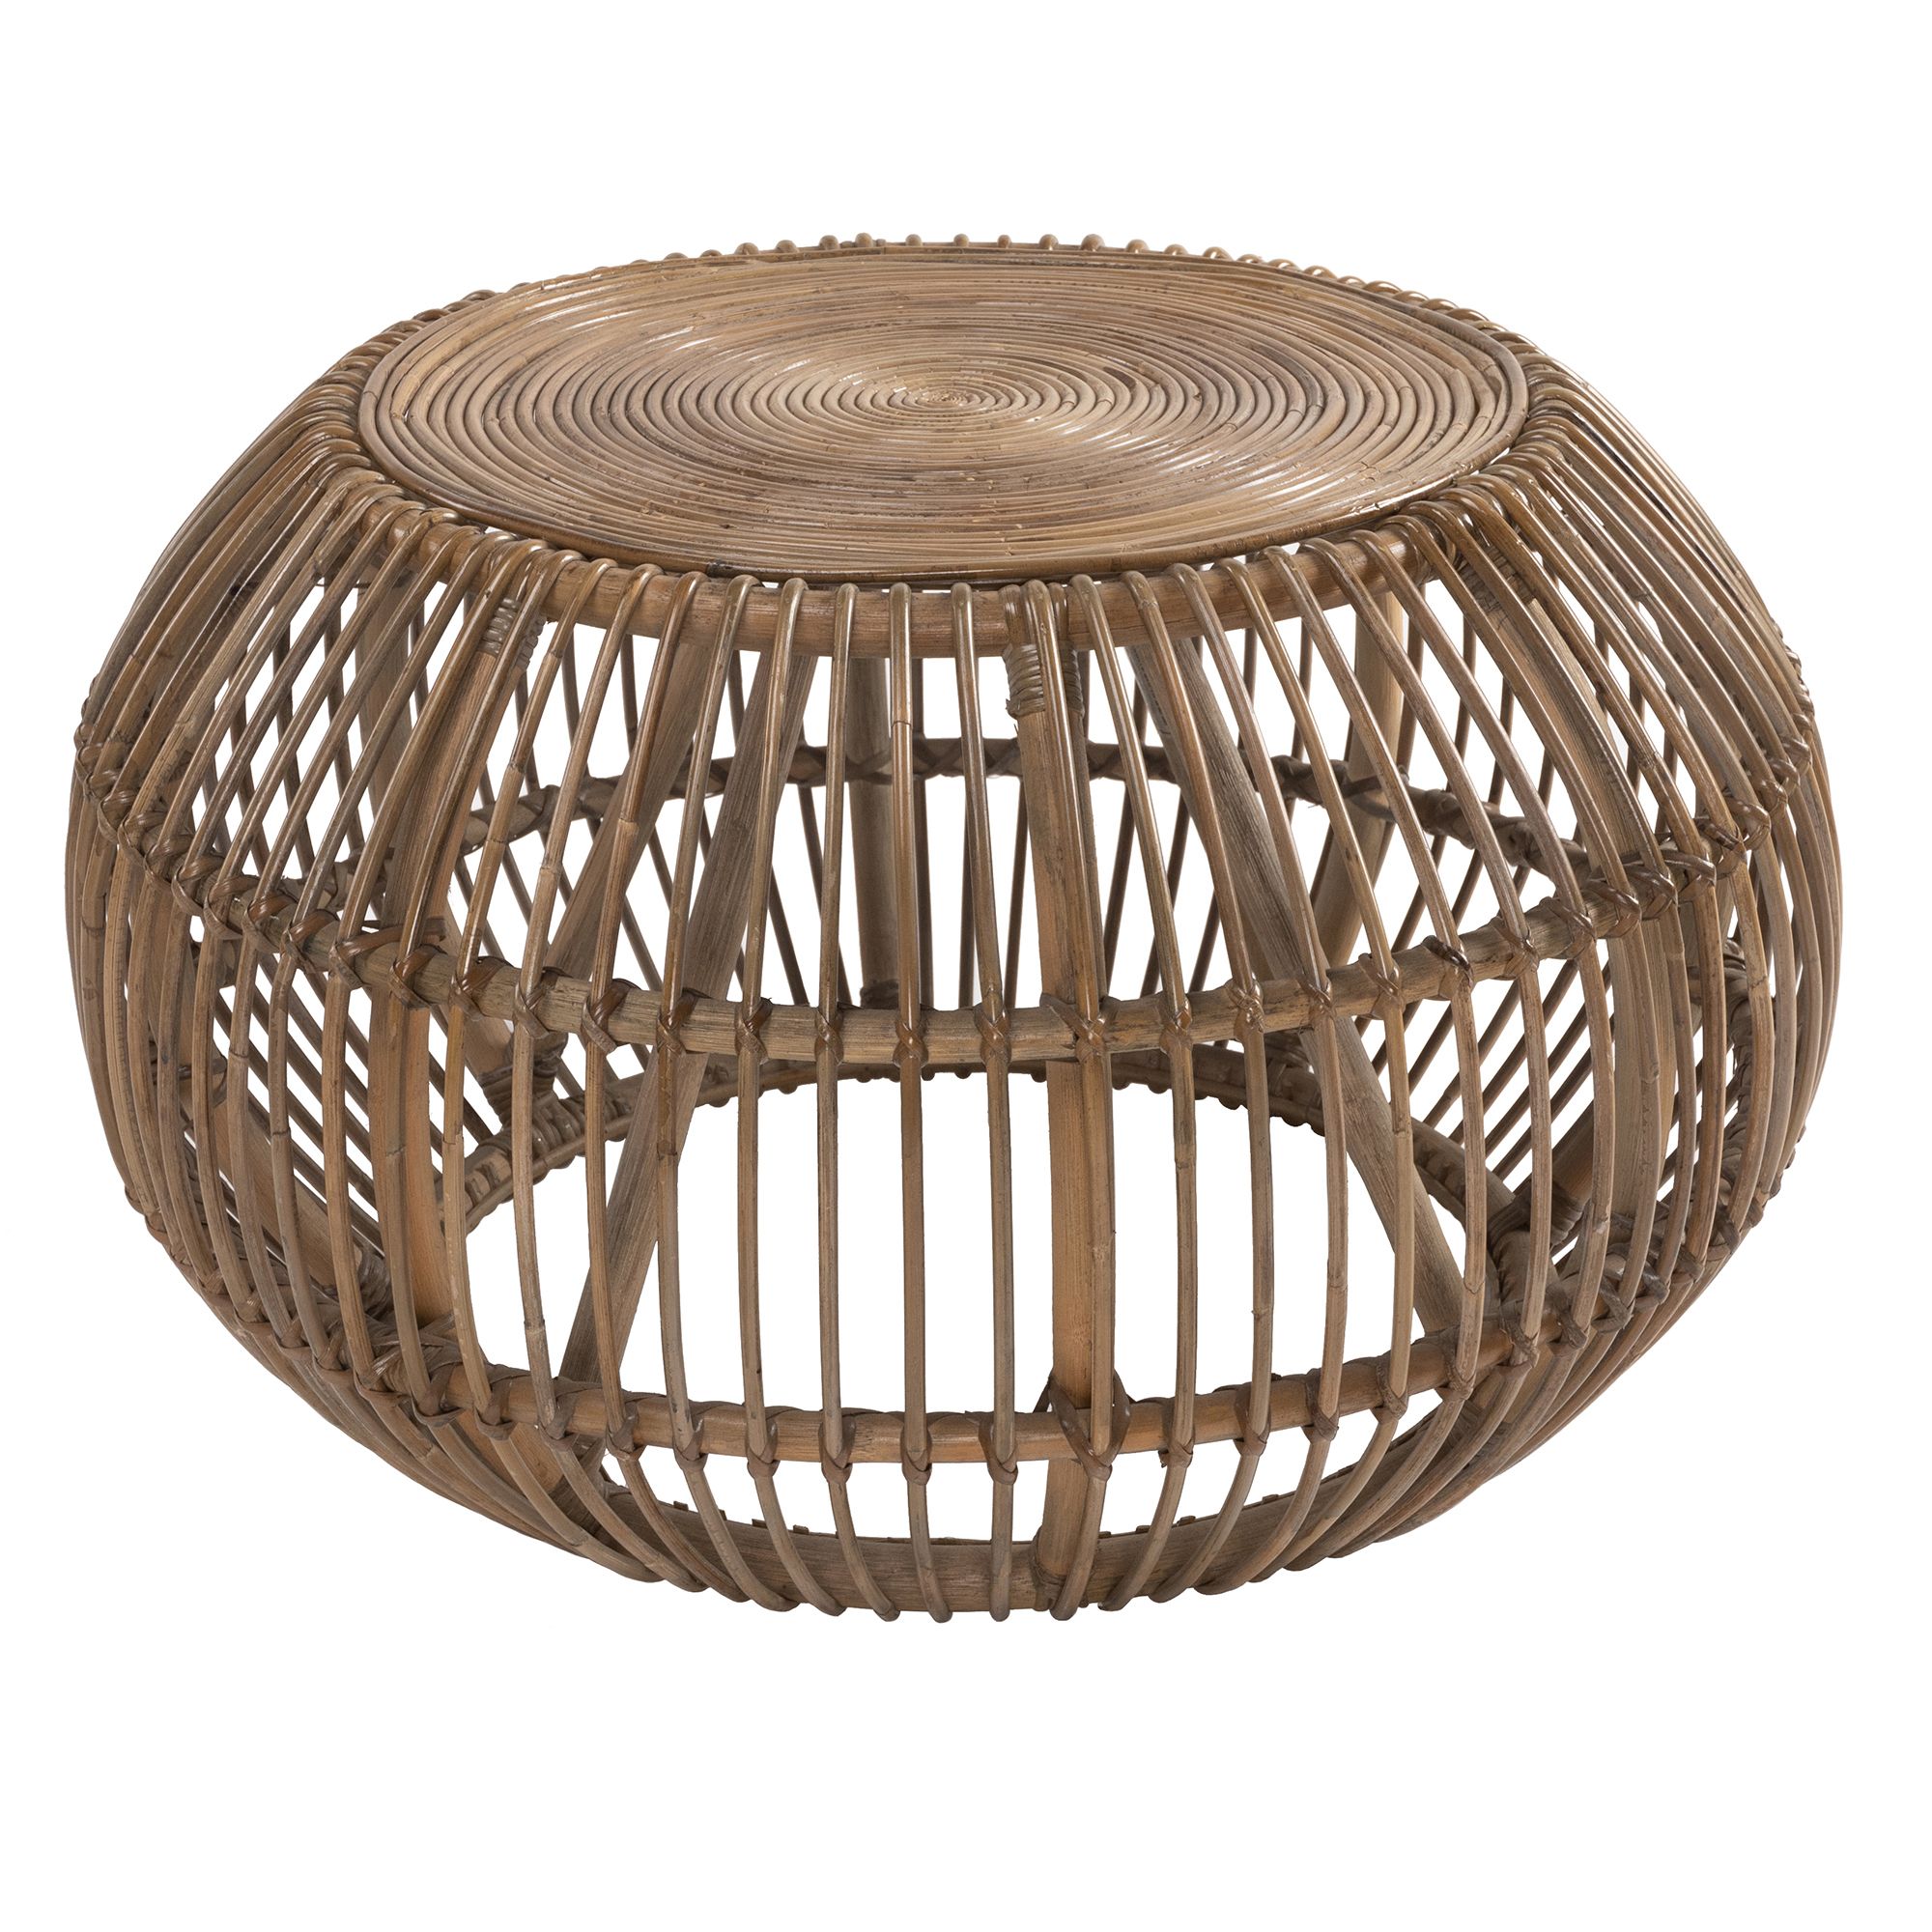 Popular Wicker Coffee Tables In Handwoven Round Rattan Coffee Table With Concentric Circle Top, Brown (View 3 of 10)